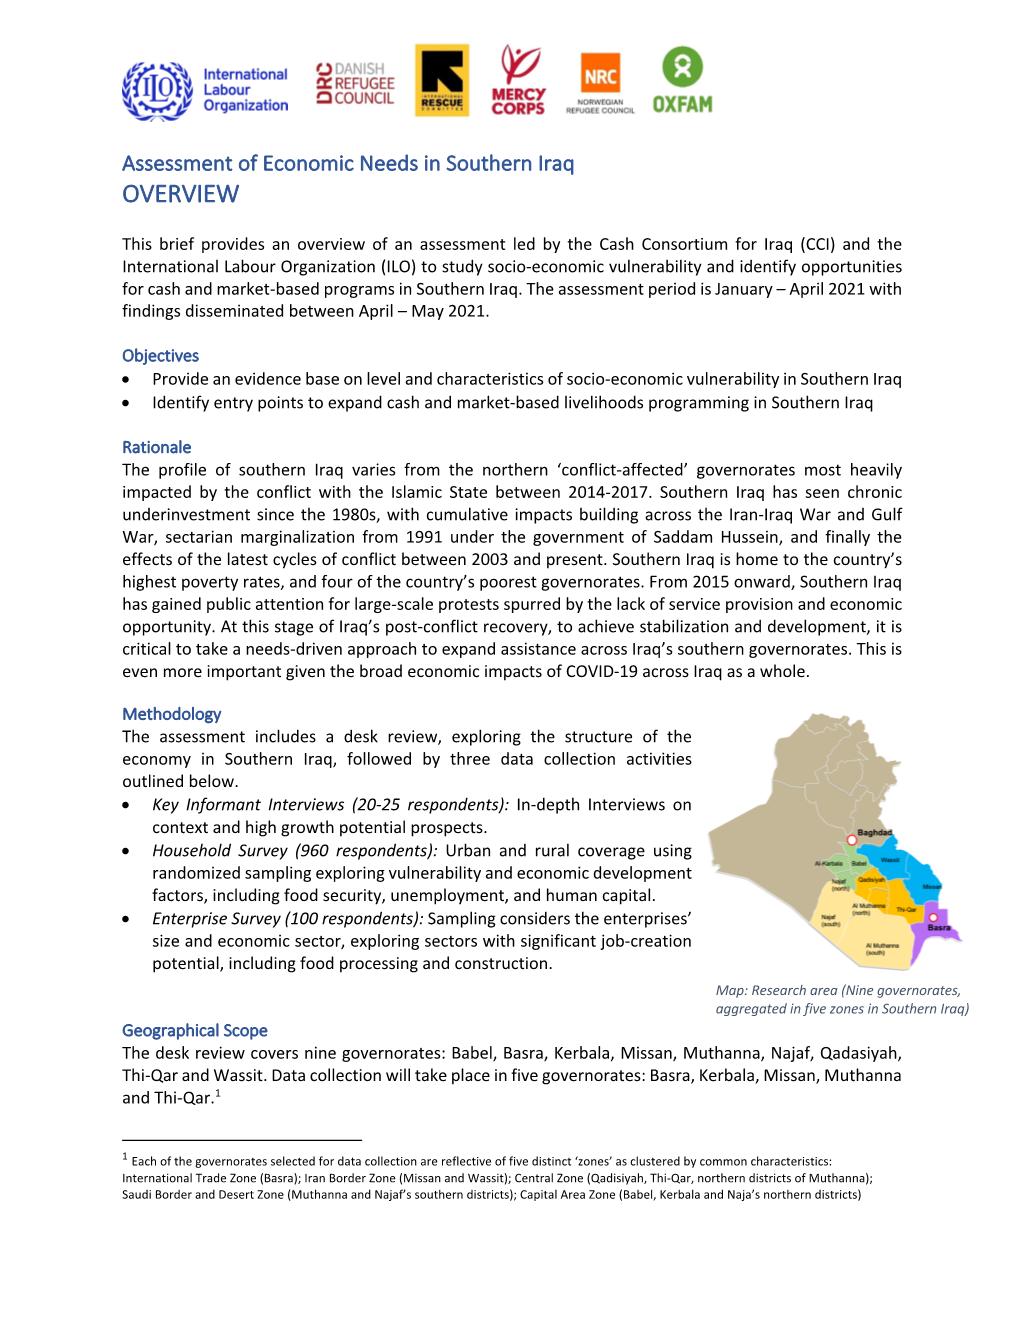 Assessment of Economic Needs in Southern Iraq (An Overview)Pdf